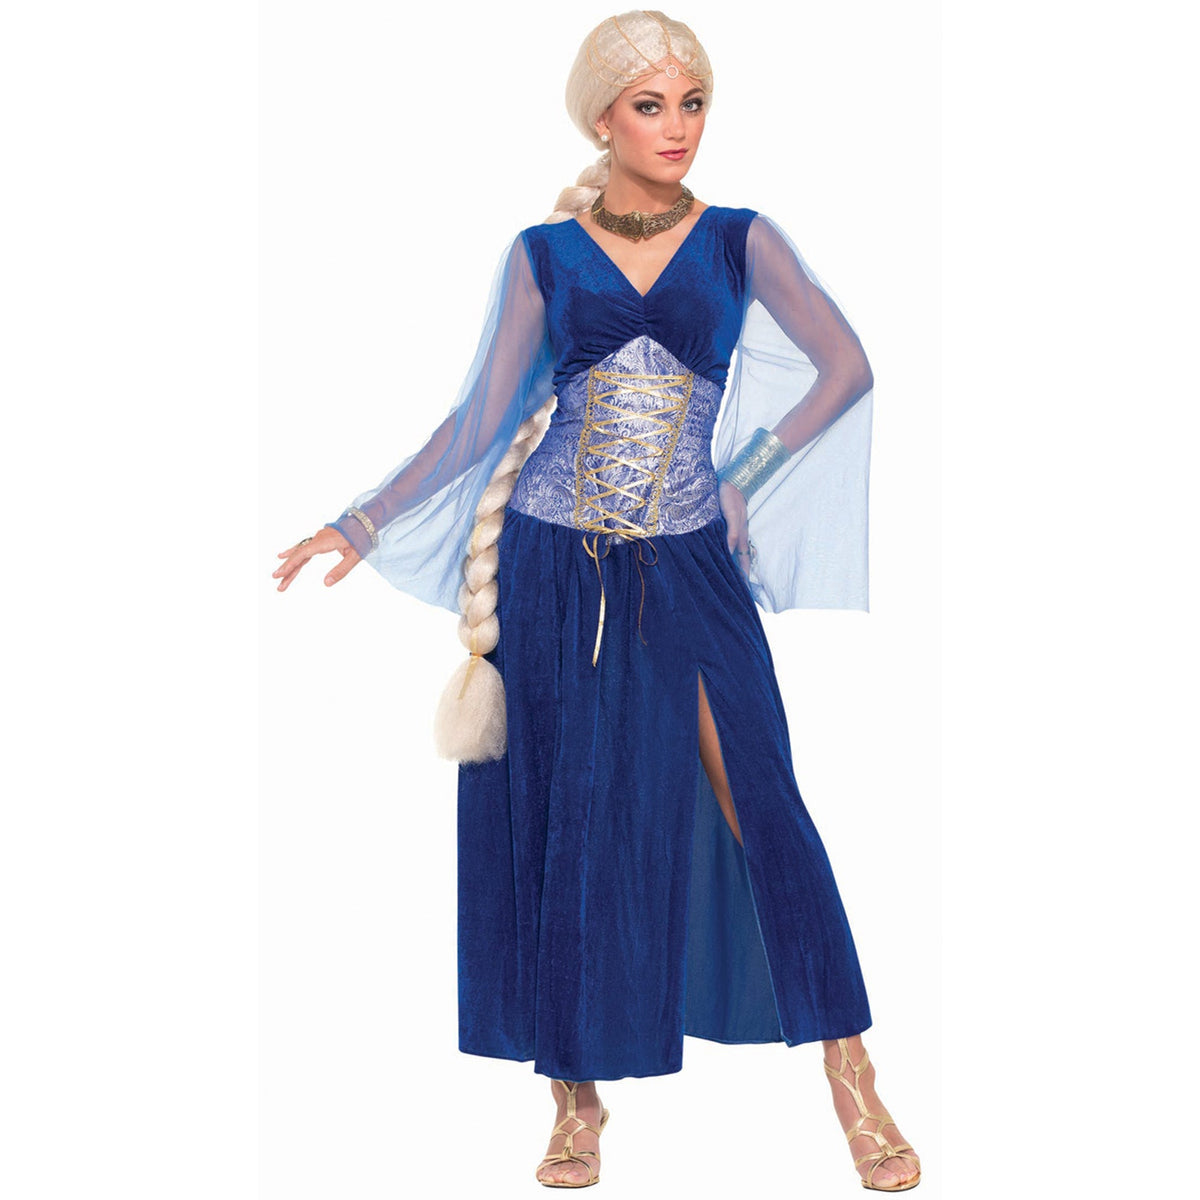 RUBIES II (Ruby Slipper Sales) Costumes Medieval Blue Costume for Adults 721773728389